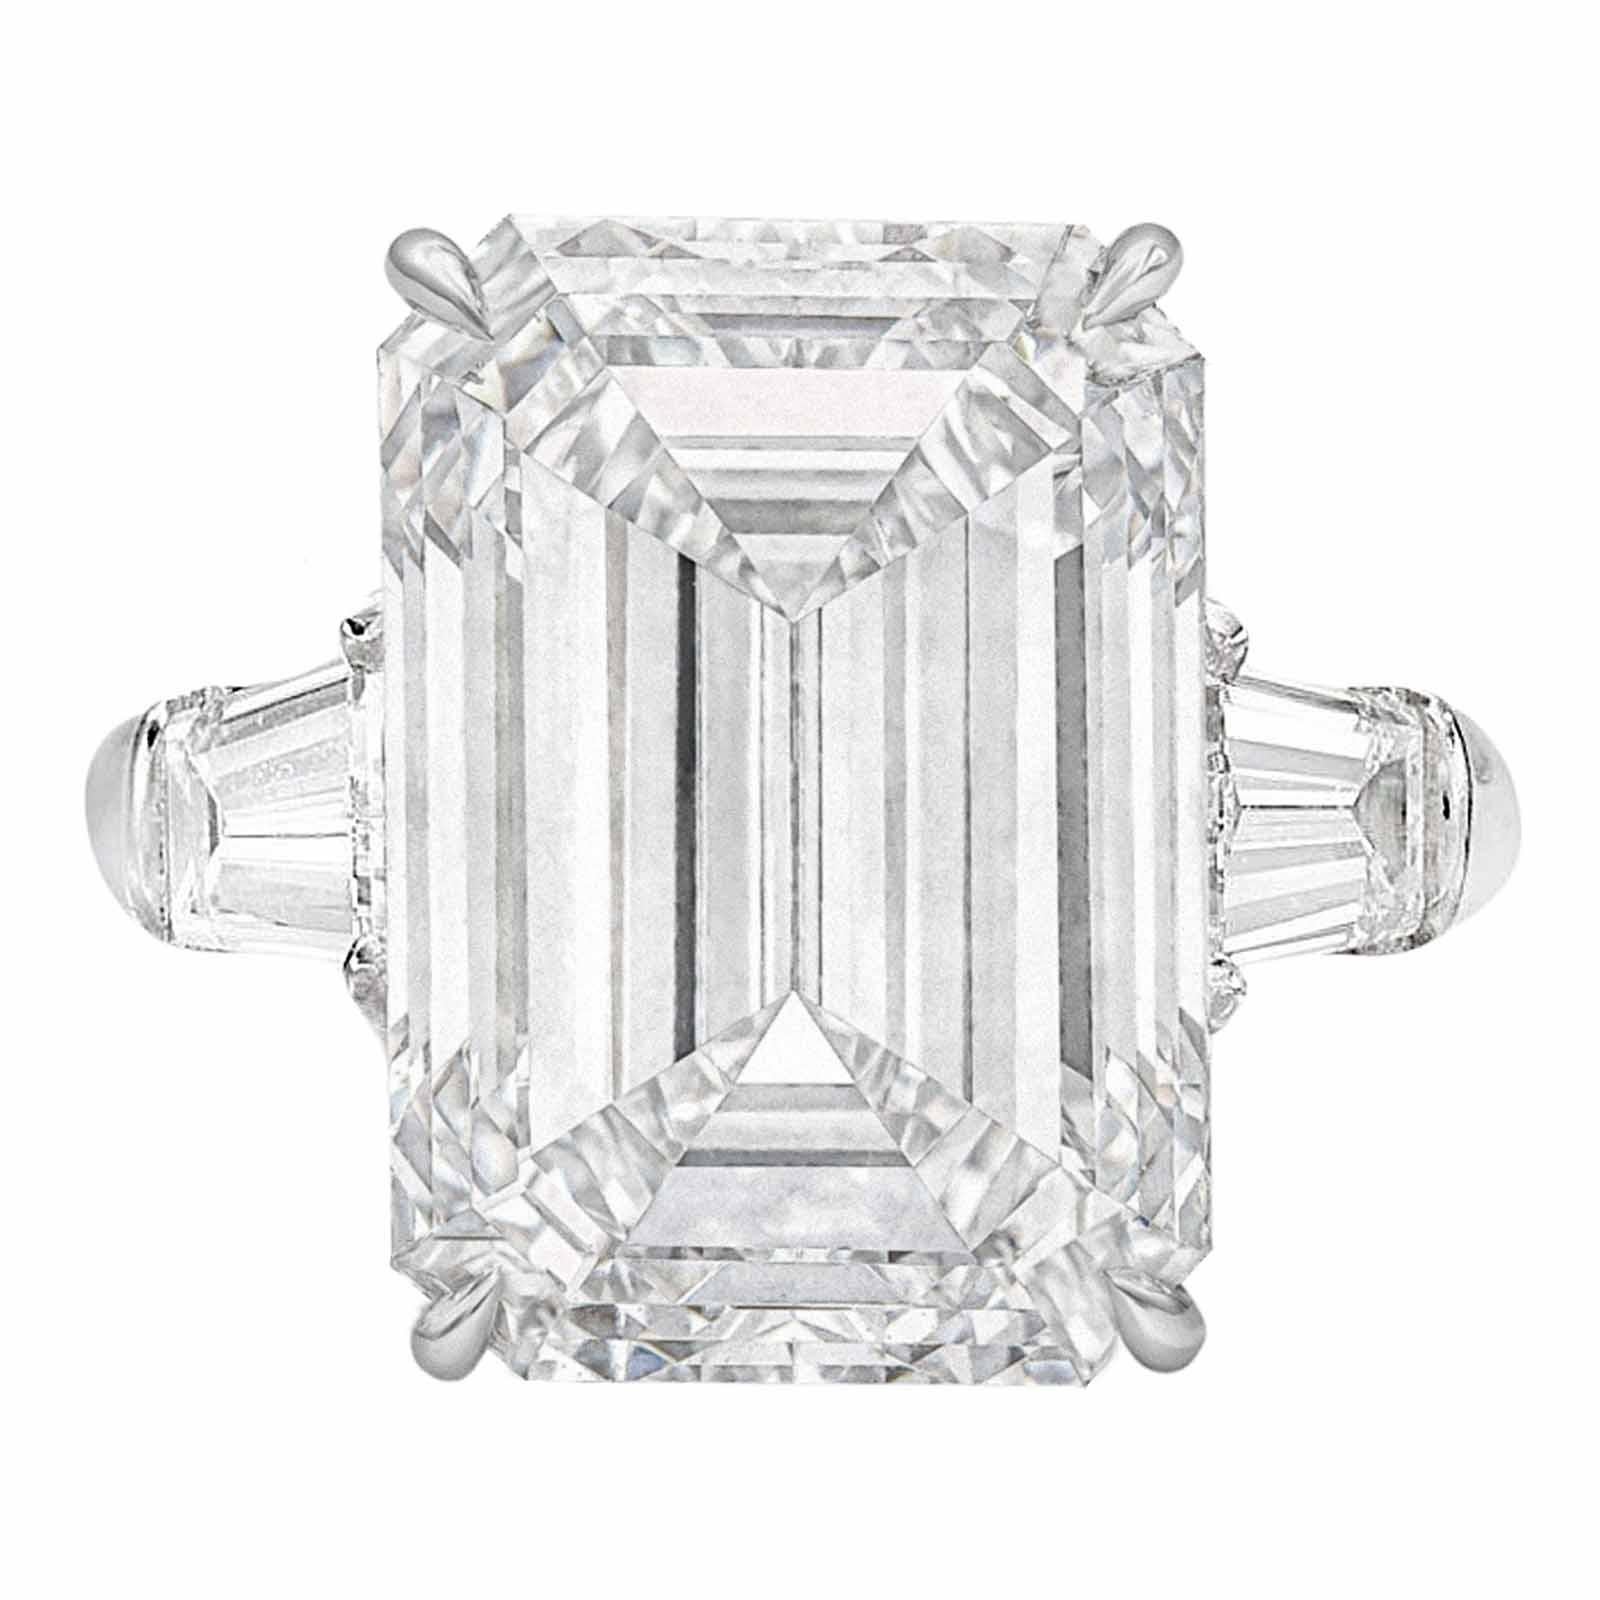 Modern GIA Certified 7 Carat Emerald Cut Diamond Ring VVS2 Clarity F color For Sale